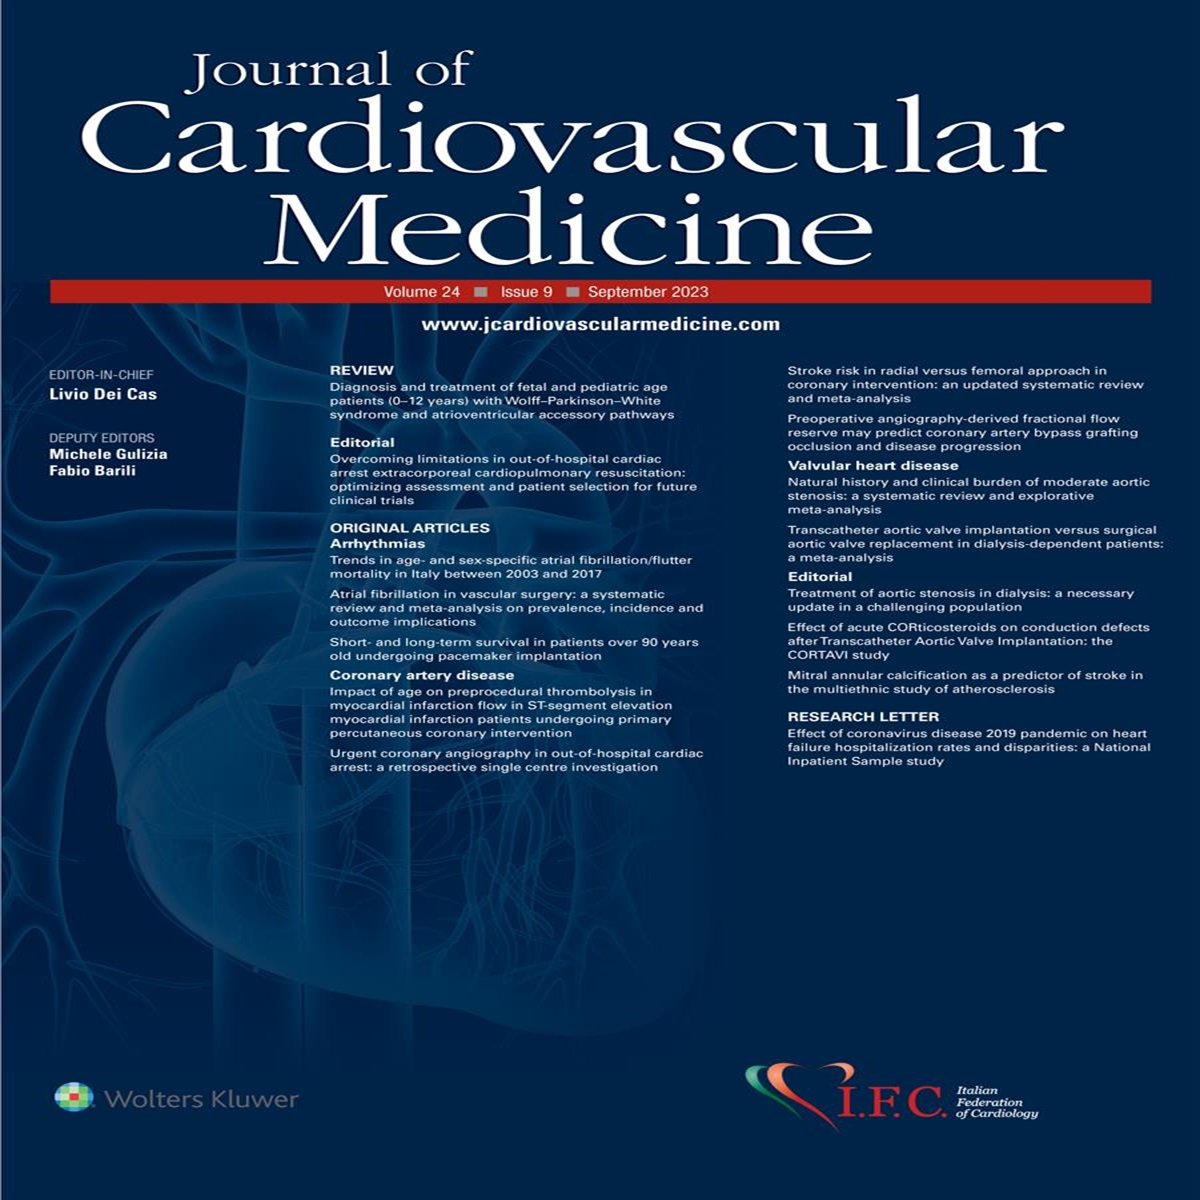 Overcoming limitations in out-of-hospital cardiac arrest extracorporeal cardiopulmonary resuscitation: optimizing assessment and patient selection for future clinical trials